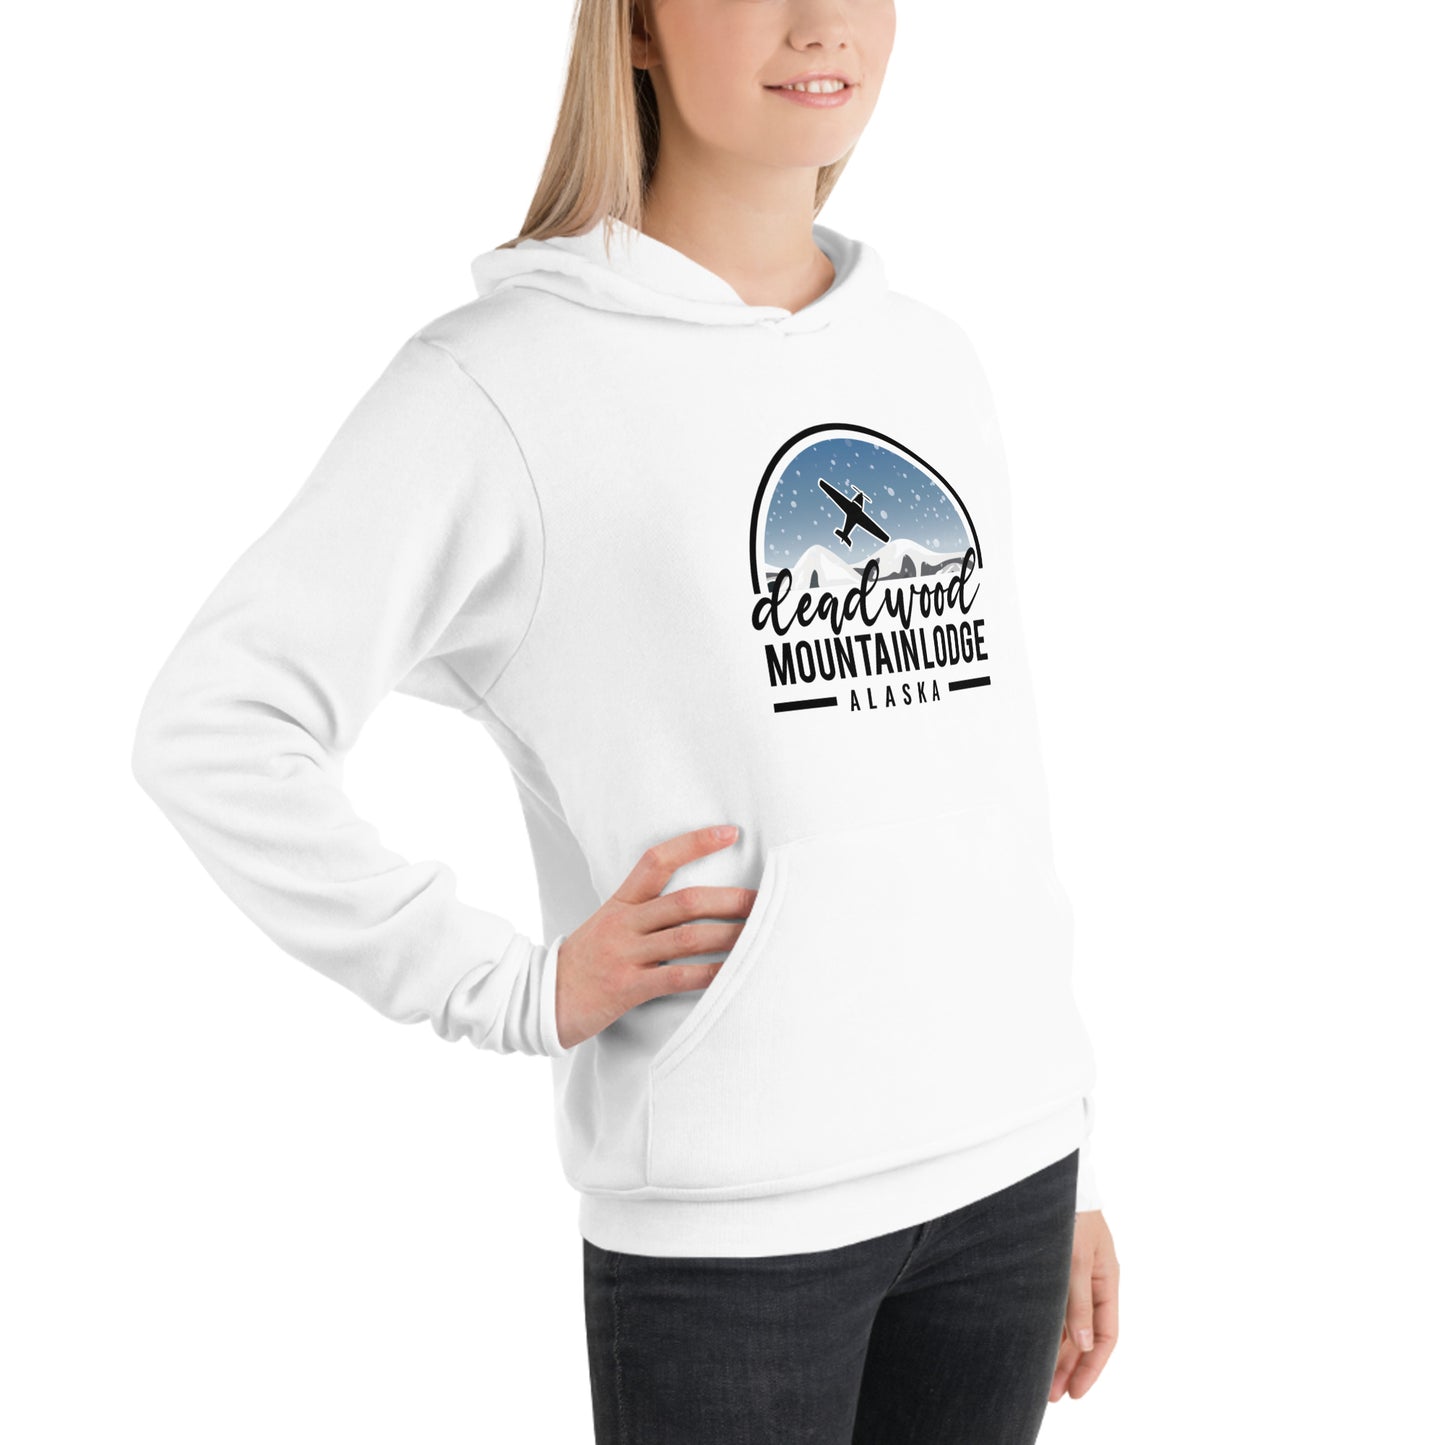 Unisex hoodie (FEATURING DEADWOOD MOUNTAIN LODGE FROM TAMING THE TULANES SERIES)